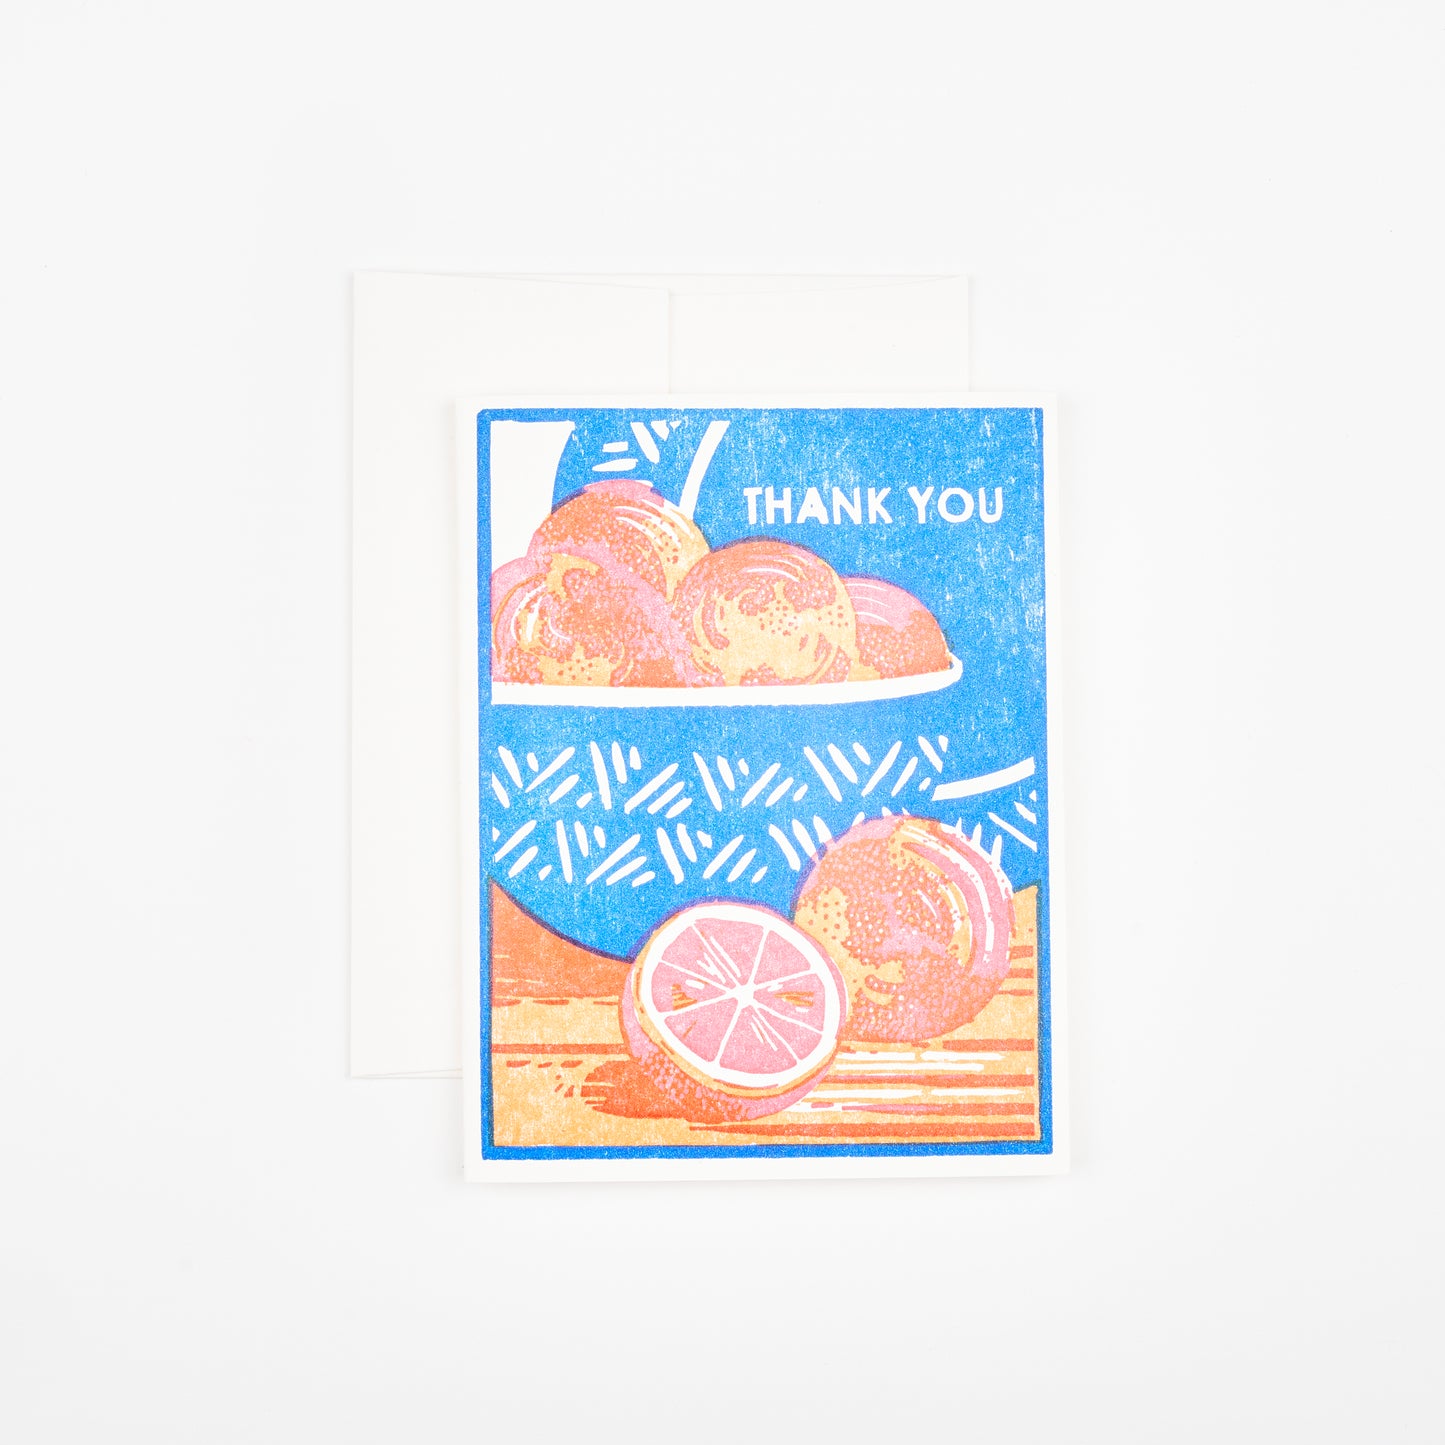 Heartell Press Thank You Card